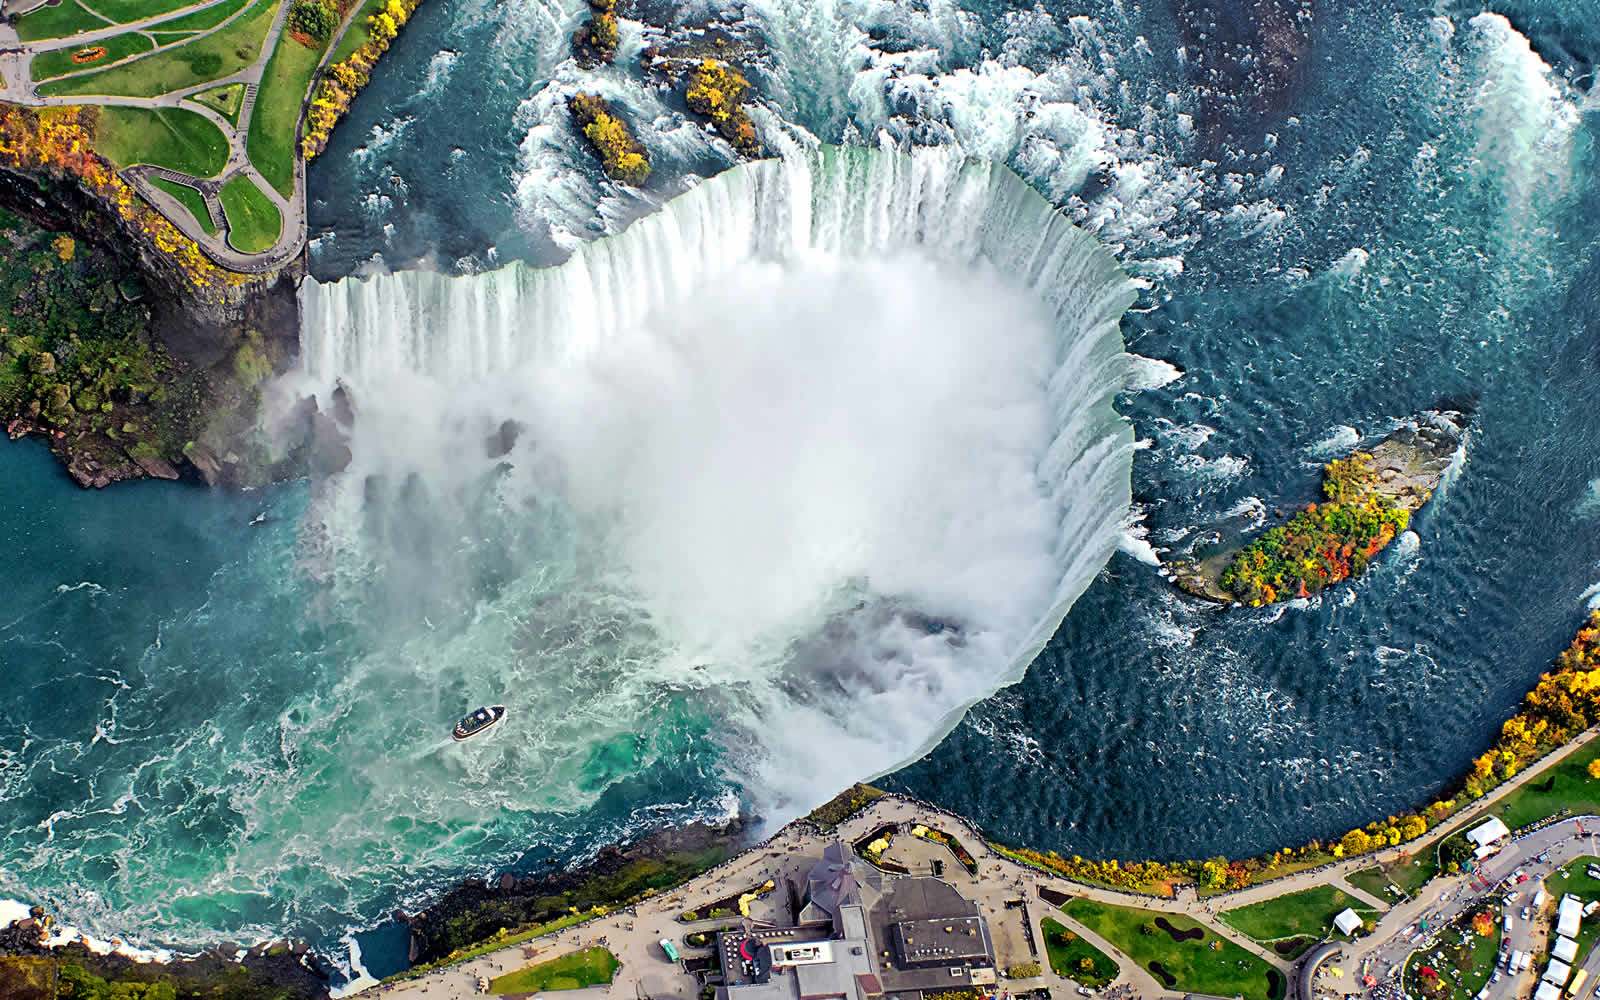 Amazing Niagara Falls Pictures & Backgrounds